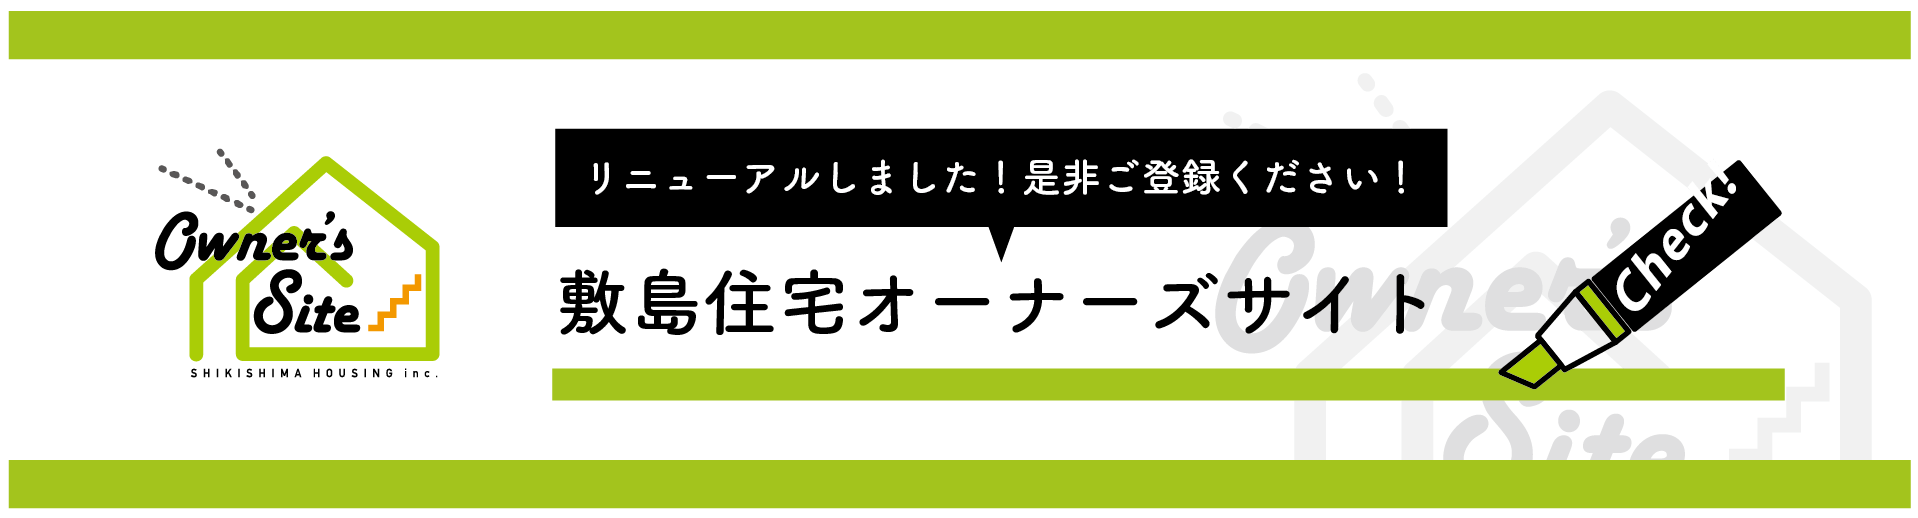 https://www.shikishima-j.co.jp/app-def/S-102/corporate/wp-content/uploads/2021/12/corporate_pc.png